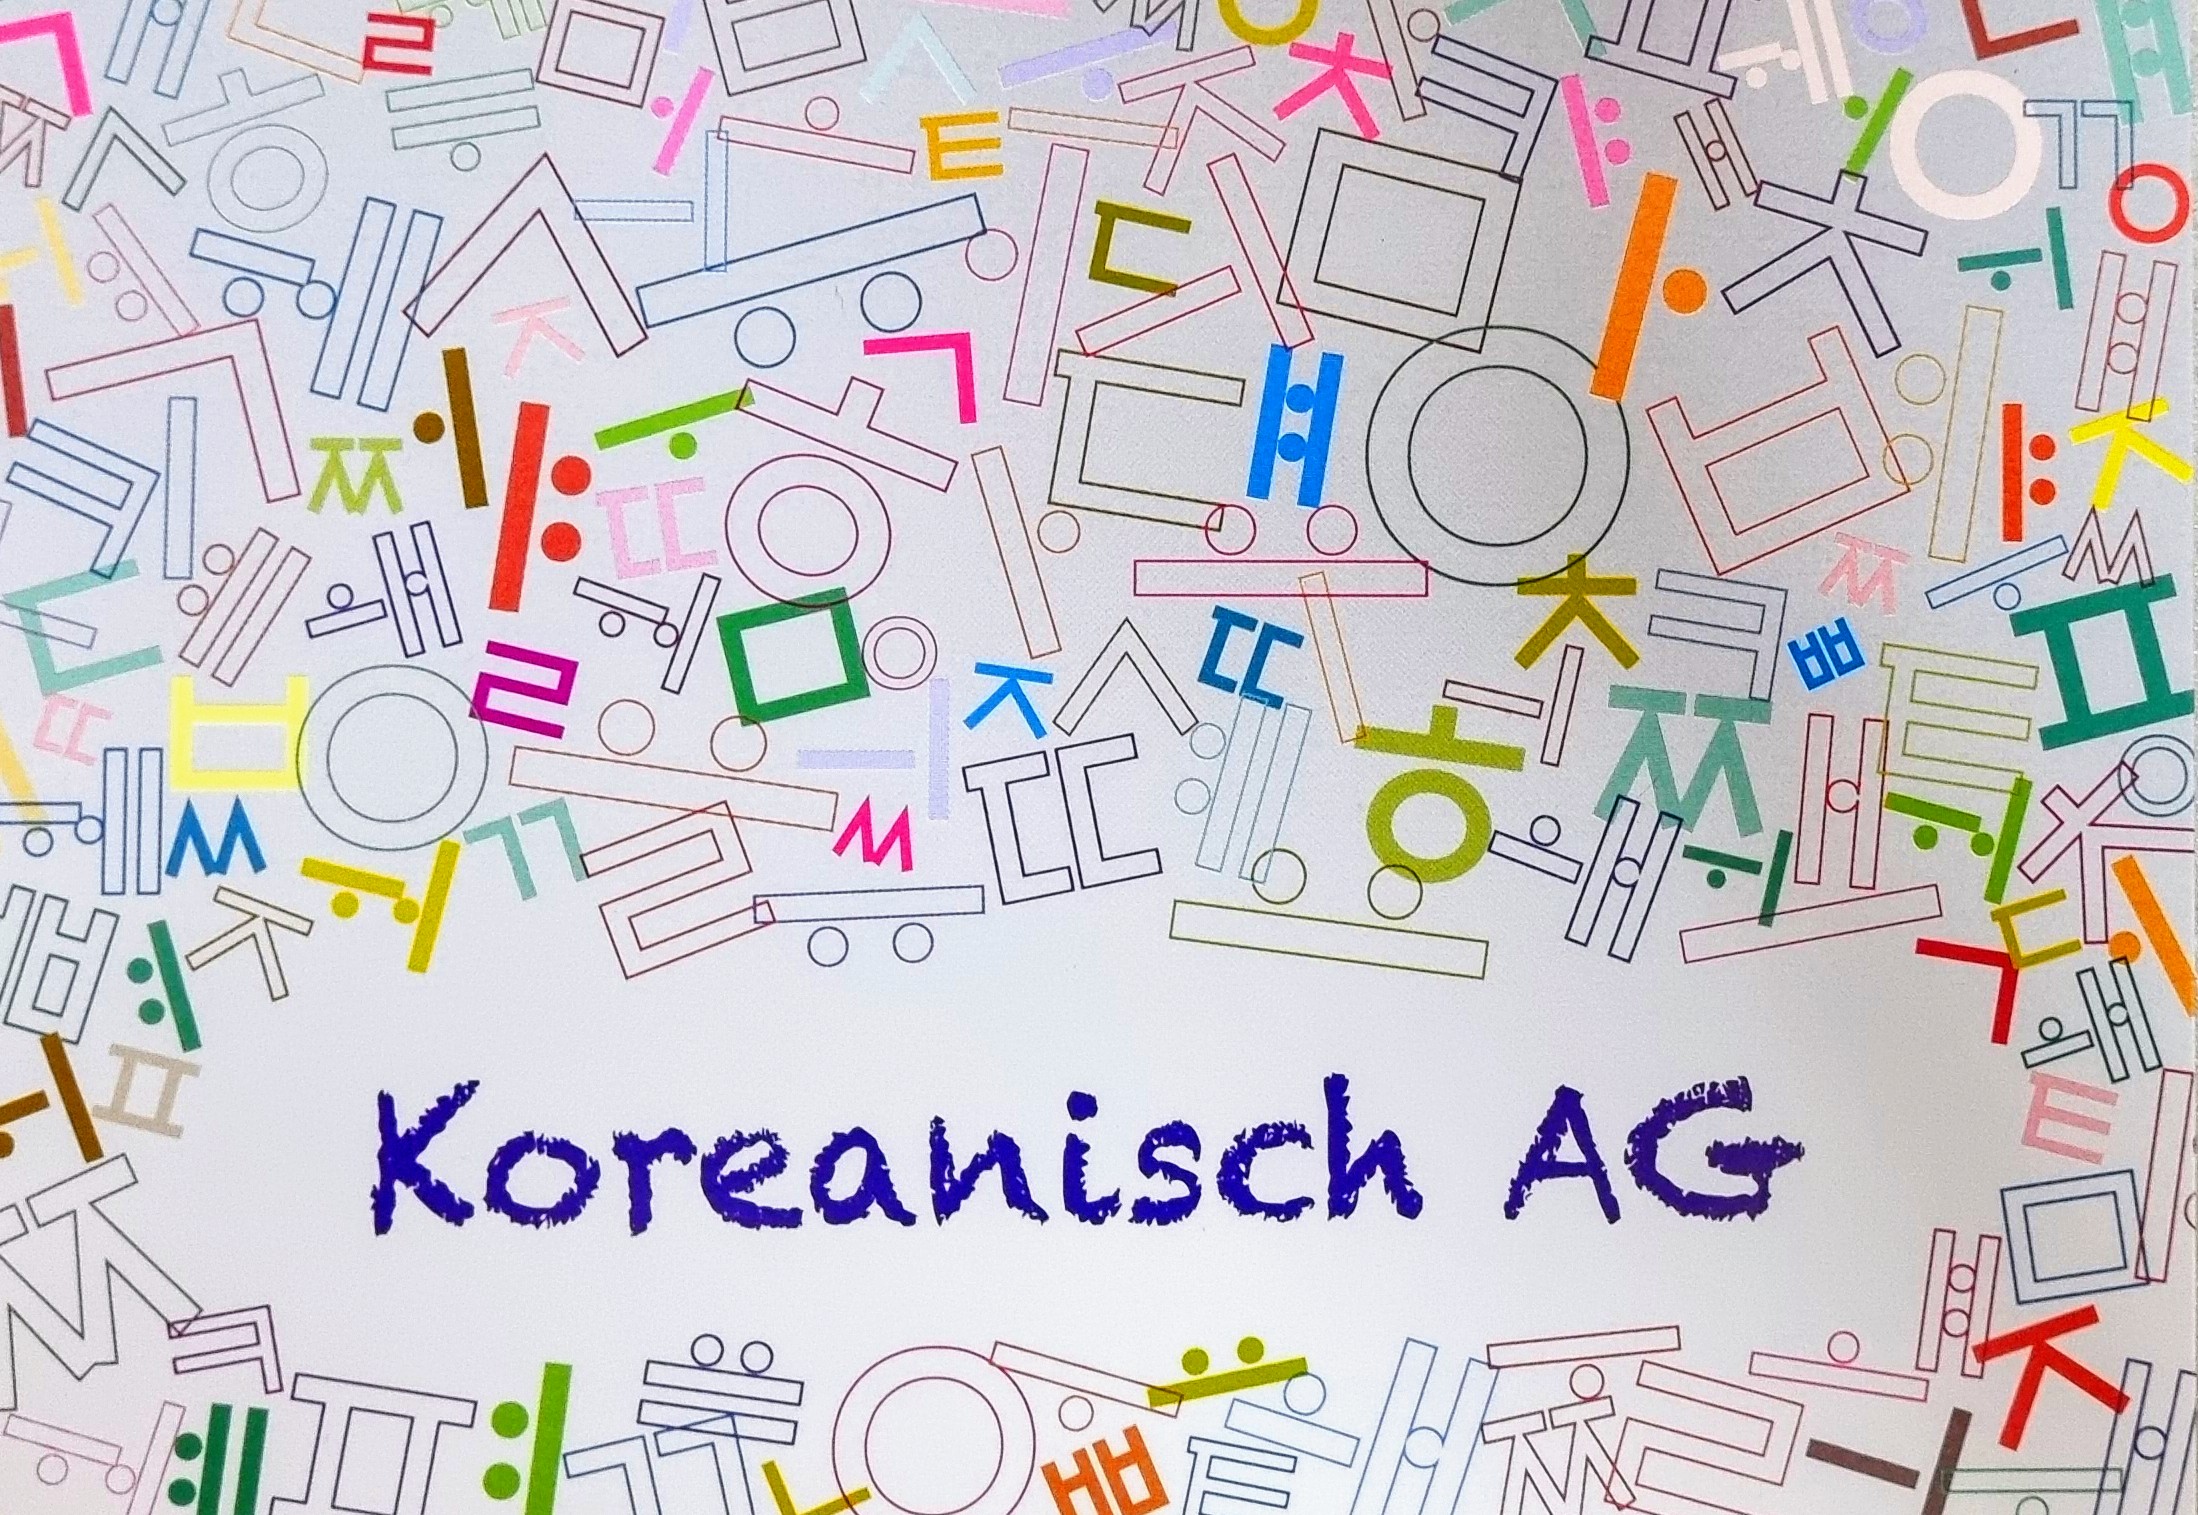 You are currently viewing Koreanisch am HGK!